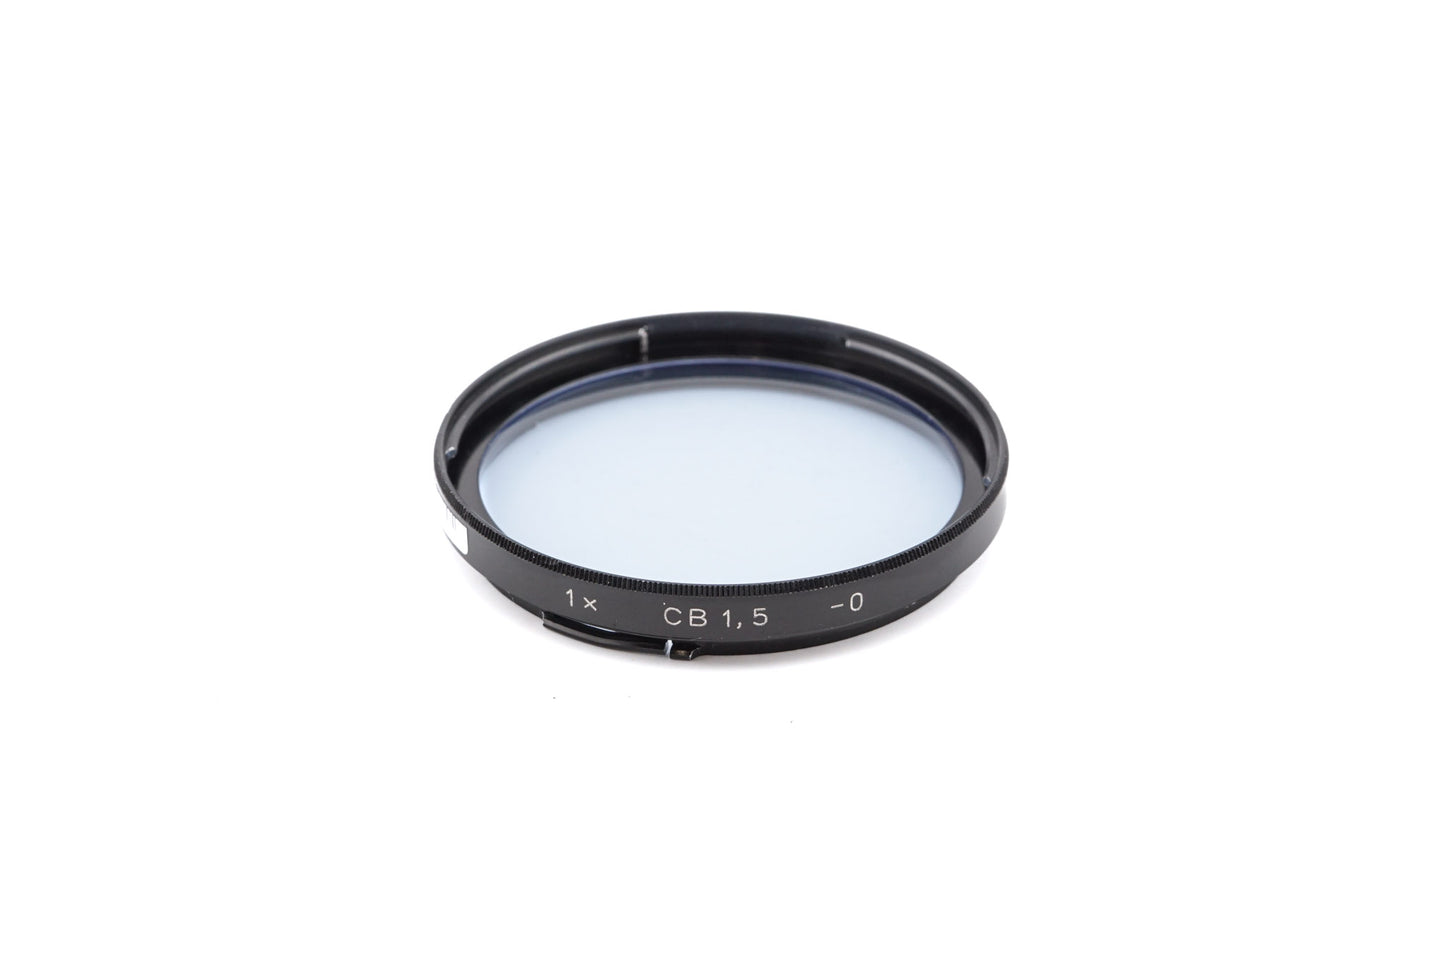 Hasselblad B50 Color Balancing Filter 1x CR1,5 -0 - Accessory